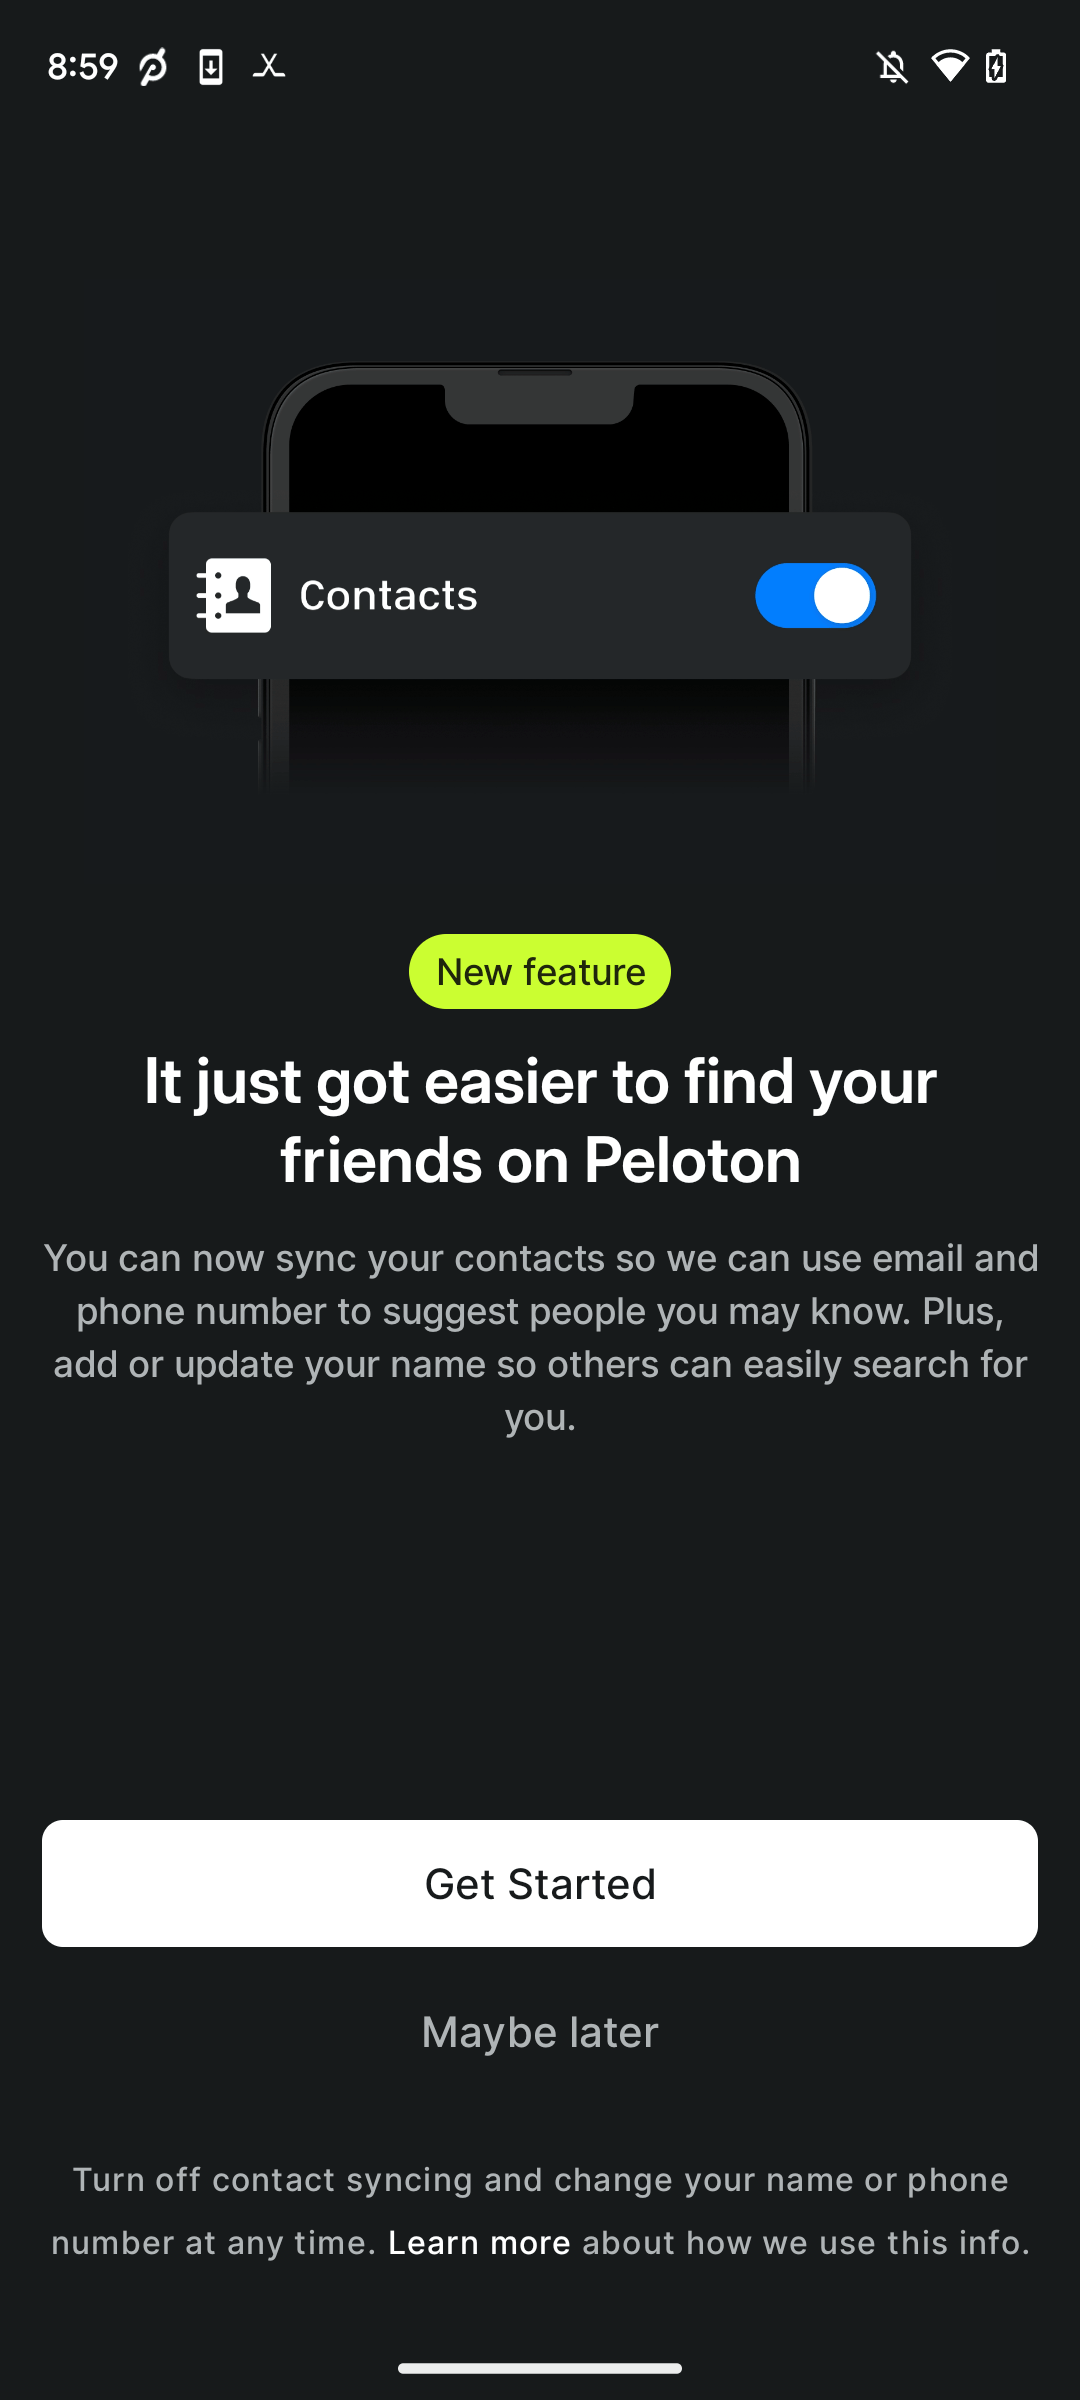 Peloton app alert notifying members of the updated search features.